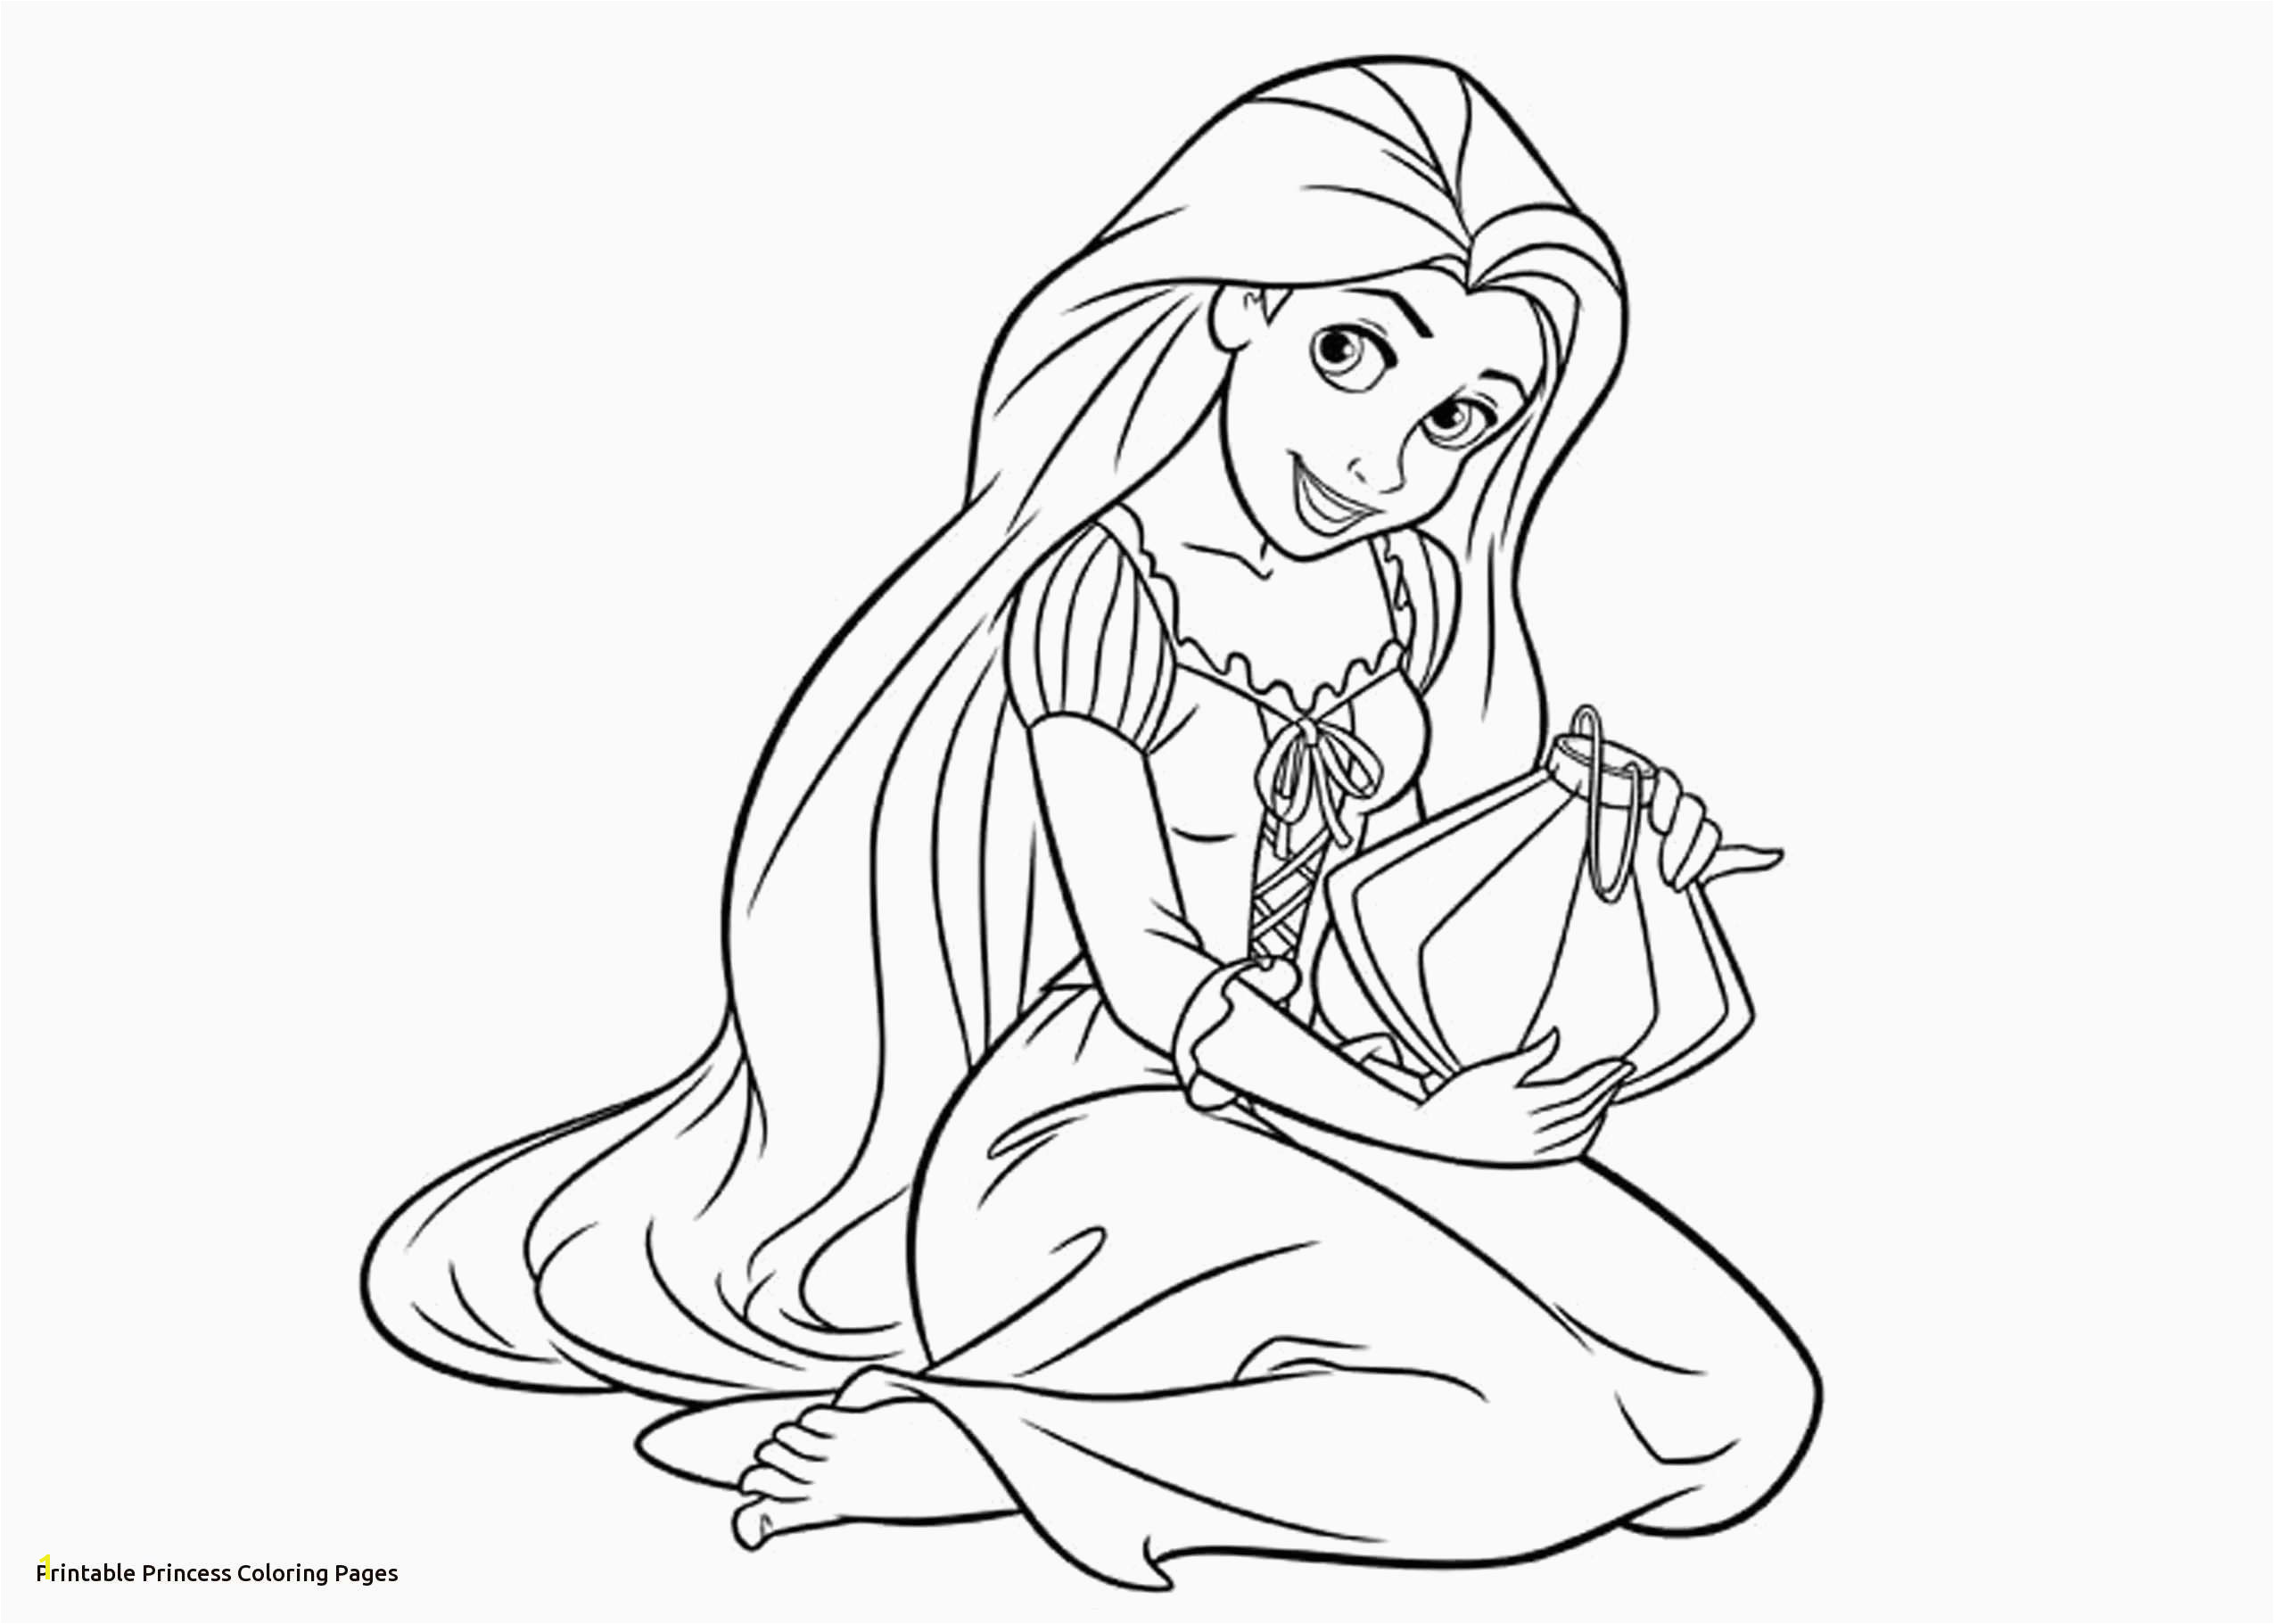 Disney Princesses Coloring Pages 0d Princess Coloring Sheets Lovely Princess Ariel Dancing Coloring Page for